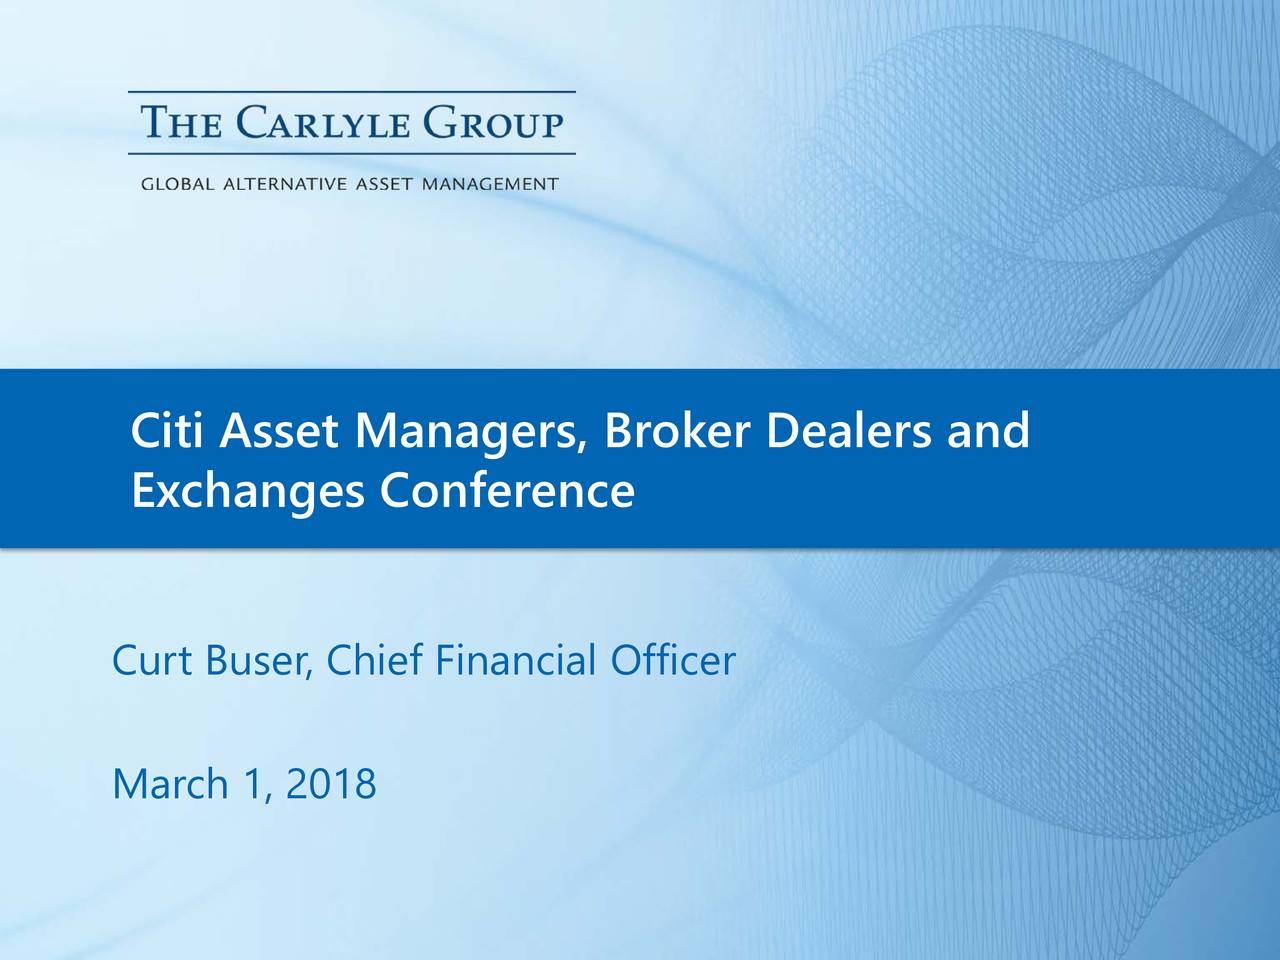 Citi Asset Managers, Broker Dealers and